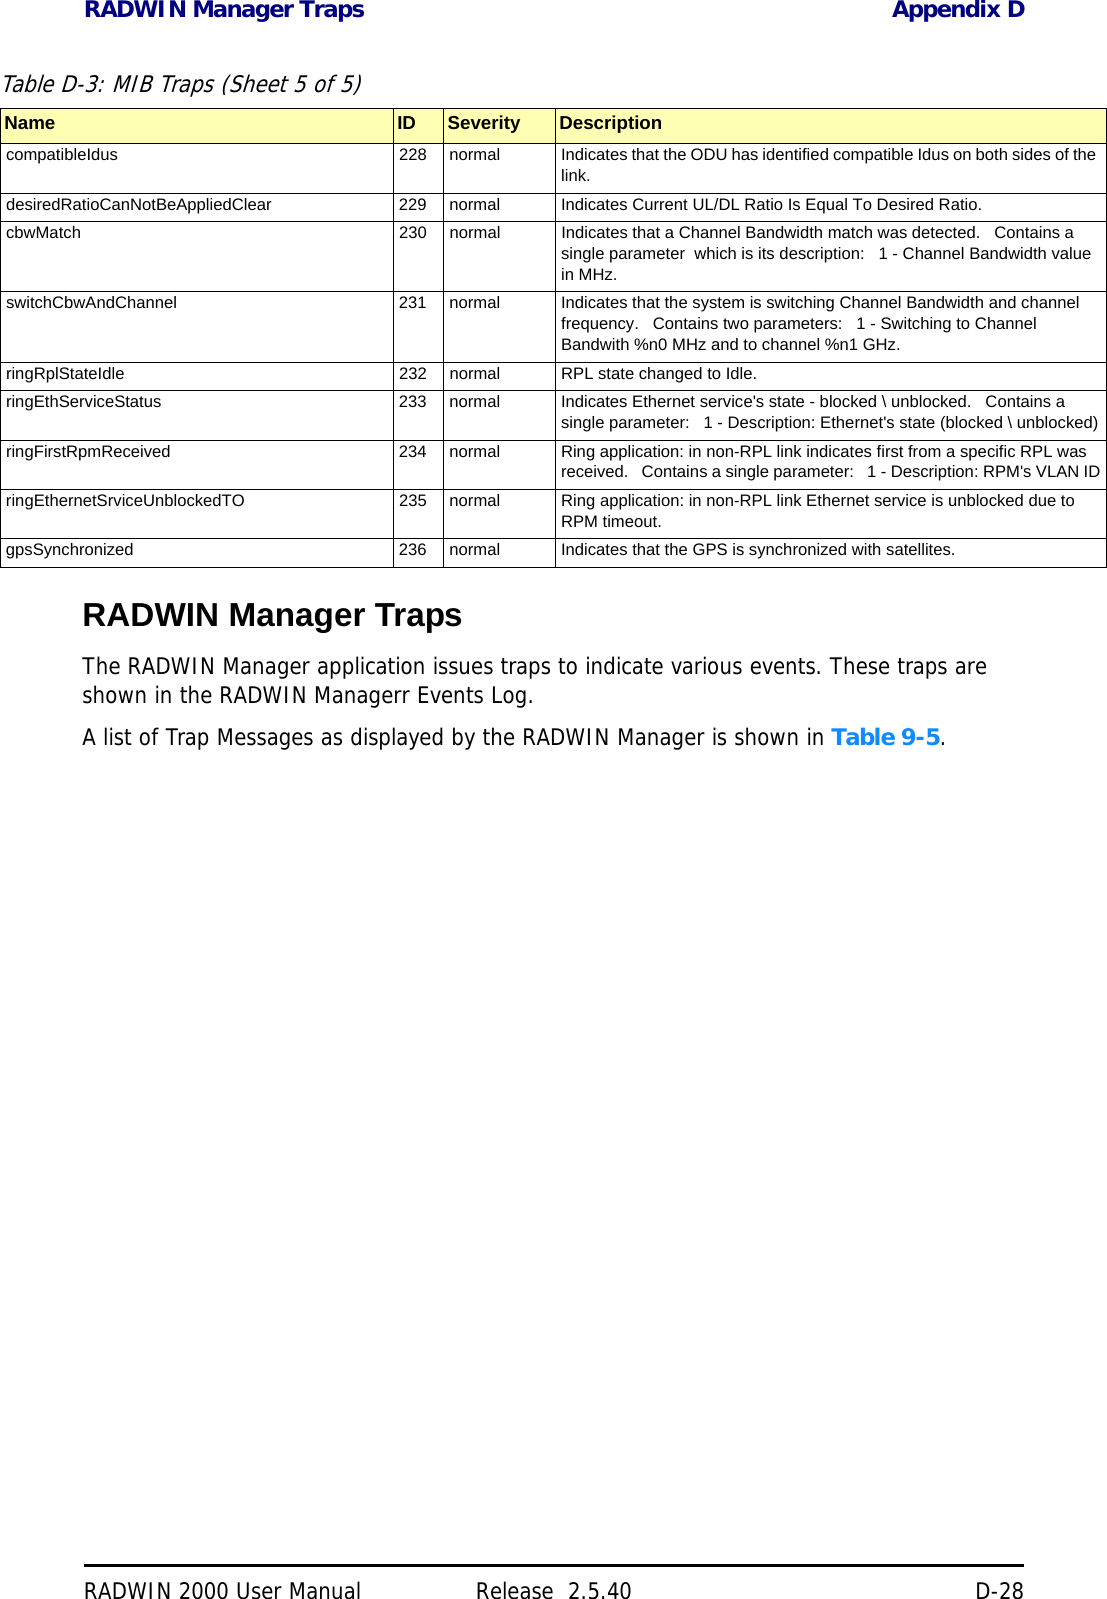 RADWIN Manager Traps Appendix DRADWIN 2000 User Manual Release  2.5.40 D-28RADWIN Manager TrapsThe RADWIN Manager application issues traps to indicate various events. These traps are shown in the RADWIN Managerr Events Log.A list of Trap Messages as displayed by the RADWIN Manager is shown in Table 9-5. compatibleIdus 228 normal Indicates that the ODU has identified compatible Idus on both sides of the link.    desiredRatioCanNotBeAppliedClear 229 normal Indicates Current UL/DL Ratio Is Equal To Desired Ratio.    cbwMatch 230 normal Indicates that a Channel Bandwidth match was detected.   Contains a single parameter  which is its description:   1 - Channel Bandwidth value in MHz.    switchCbwAndChannel 231 normal Indicates that the system is switching Channel Bandwidth and channel frequency.   Contains two parameters:   1 - Switching to Channel Bandwith %n0 MHz and to channel %n1 GHz.    ringRplStateIdle 232 normal RPL state changed to Idle.ringEthServiceStatus 233 normal Indicates Ethernet service&apos;s state - blocked \ unblocked.   Contains a single parameter:   1 - Description: Ethernet&apos;s state (blocked \ unblocked)ringFirstRpmReceived 234 normal Ring application: in non-RPL link indicates first from a specific RPL was received.   Contains a single parameter:   1 - Description: RPM&apos;s VLAN IDringEthernetSrviceUnblockedTO 235 normal Ring application: in non-RPL link Ethernet service is unblocked due to RPM timeout.gpsSynchronized 236 normal Indicates that the GPS is synchronized with satellites.Table D-3: MIB Traps (Sheet 5 of 5)Name ID Severity Description